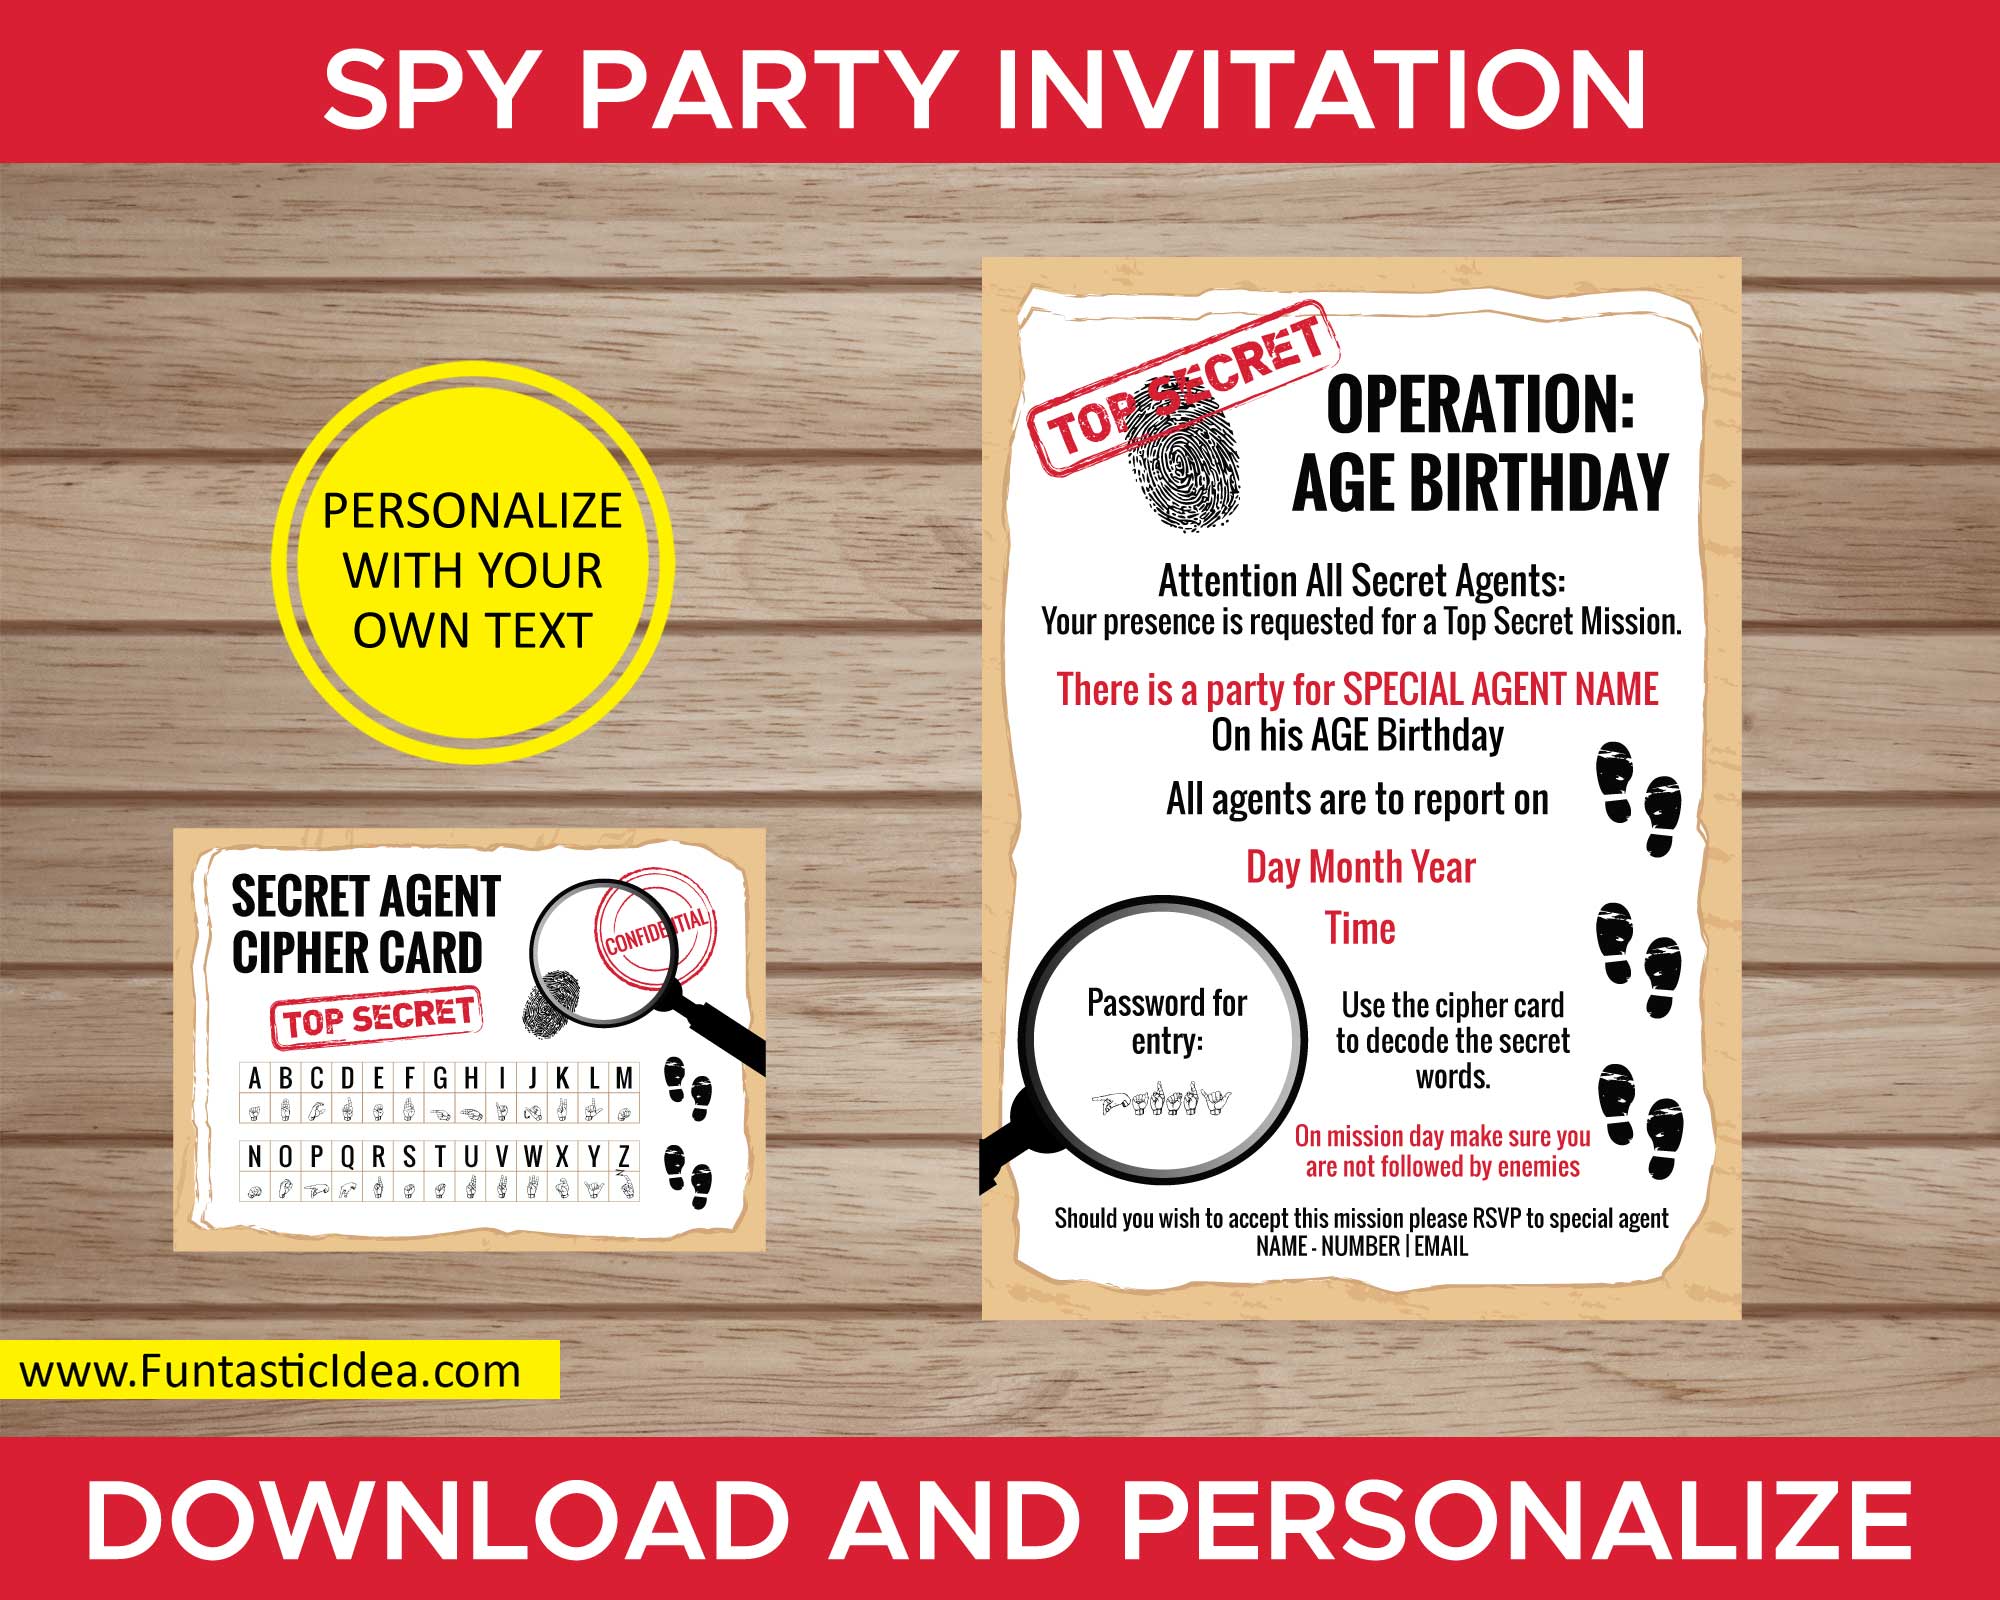 Spy Party Invitation | Uniquely Designed & Easily Personalized